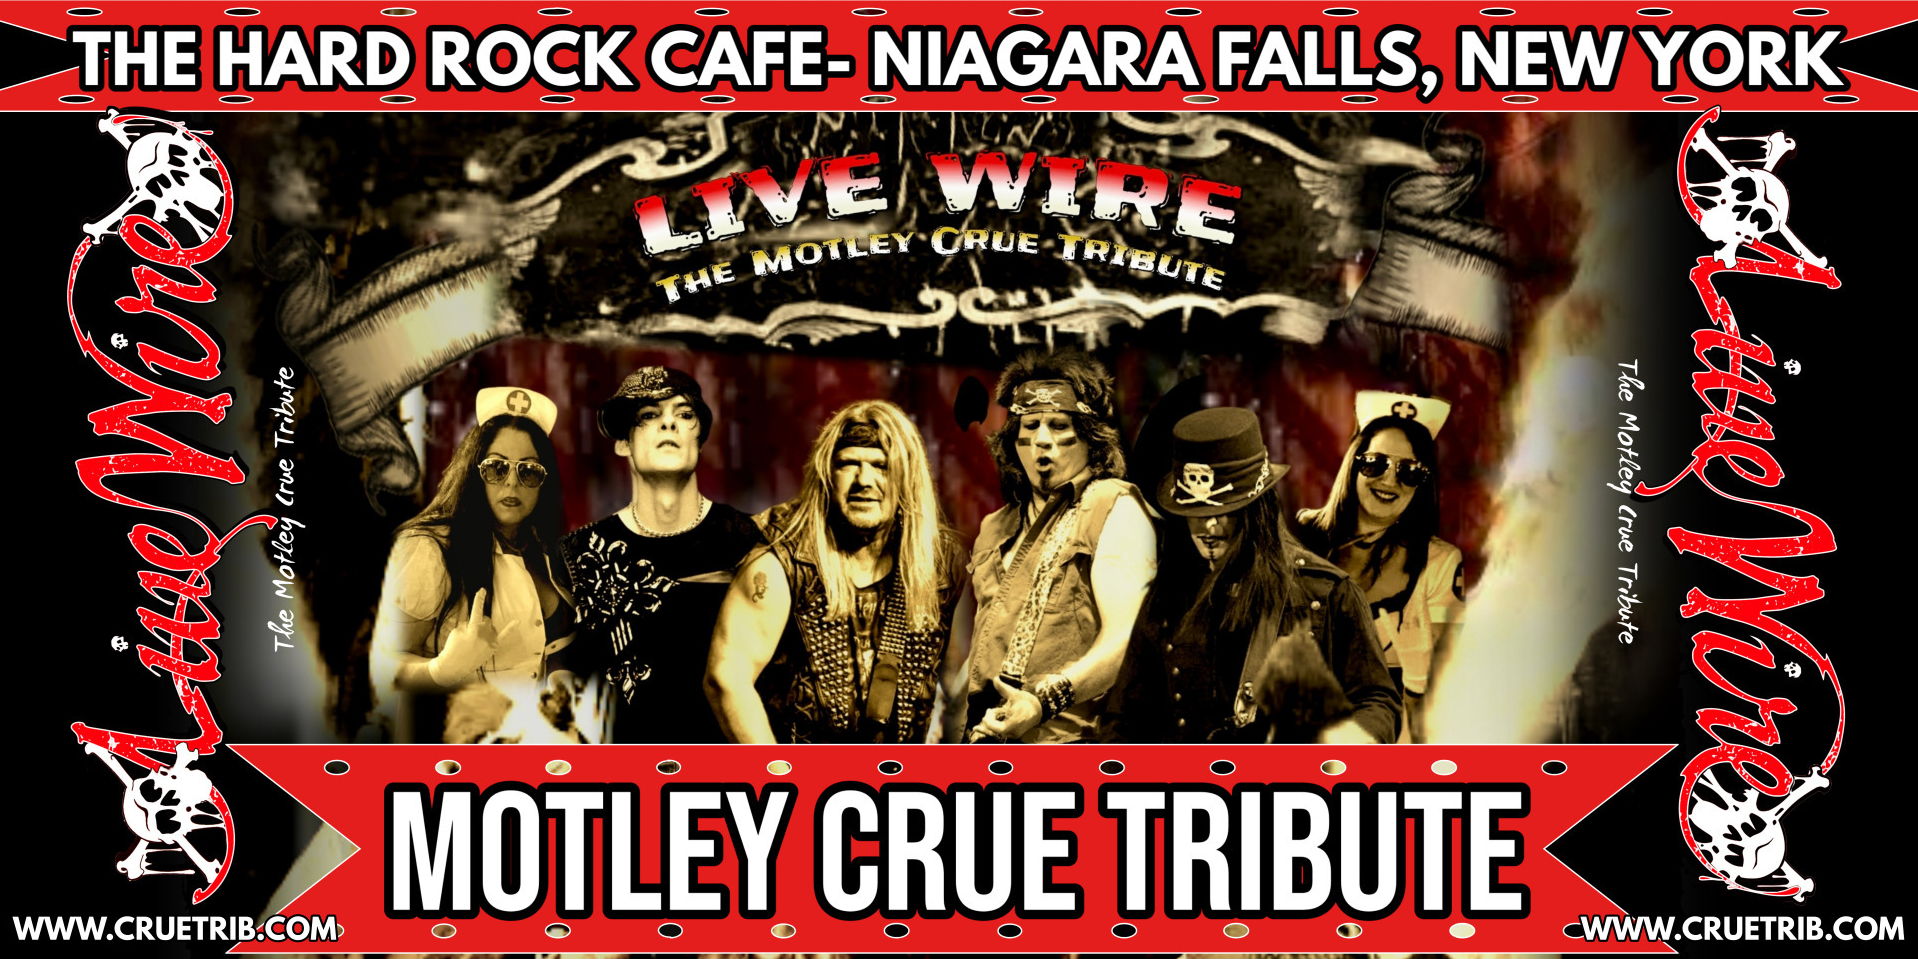 Live Wire- Motley Crue Tribute at The HARD ROCK CAFE- Niagara Falls, NY! promotional image